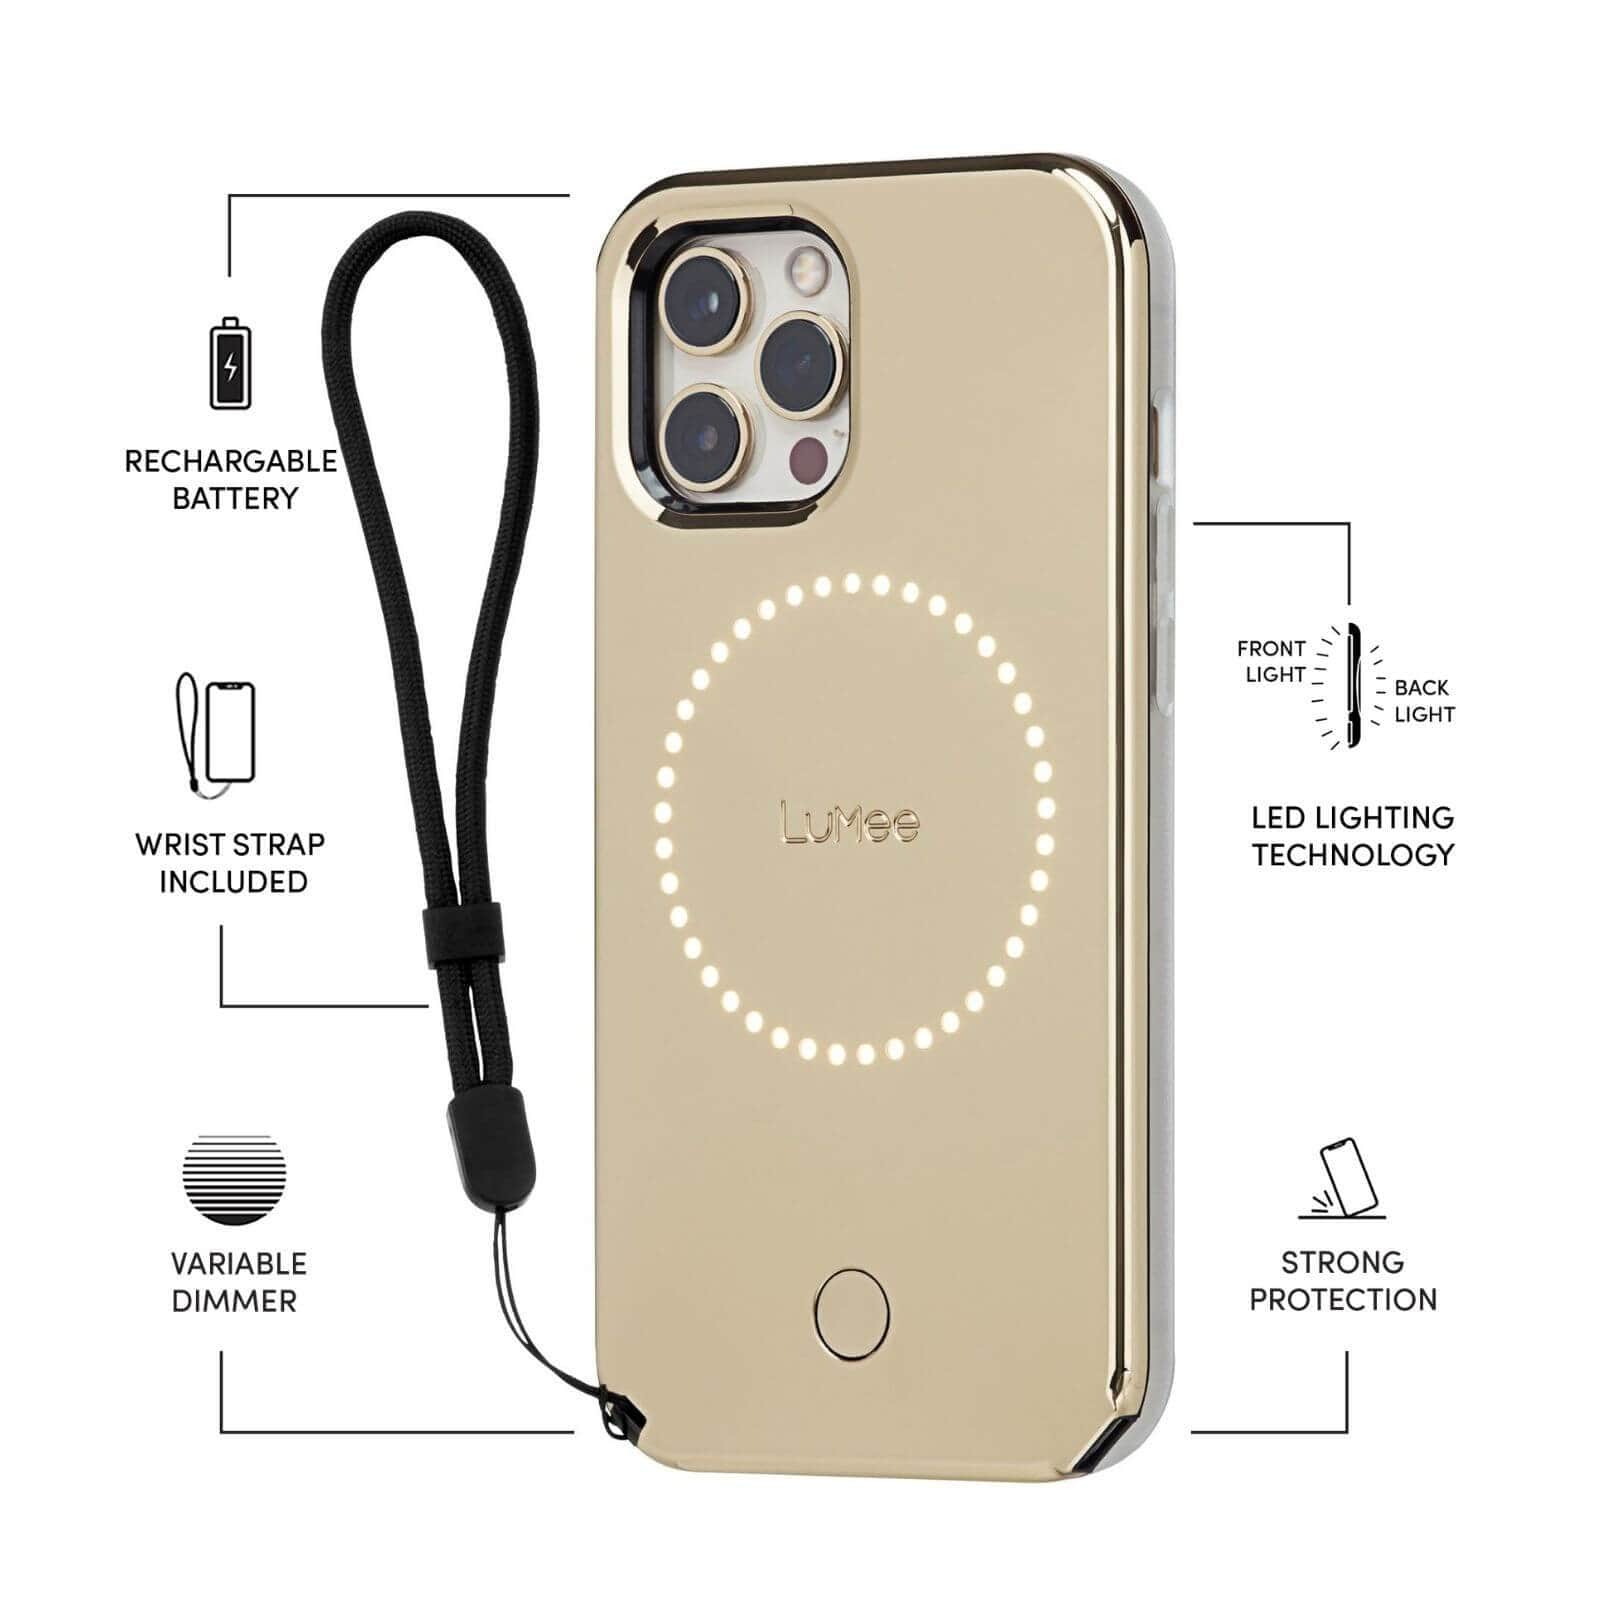 Features Rechargeable Batter, Wrist Strap Included, Variable Dimmer, Front light and back light LED lighting technology, strong protection. color::Gold Mirror